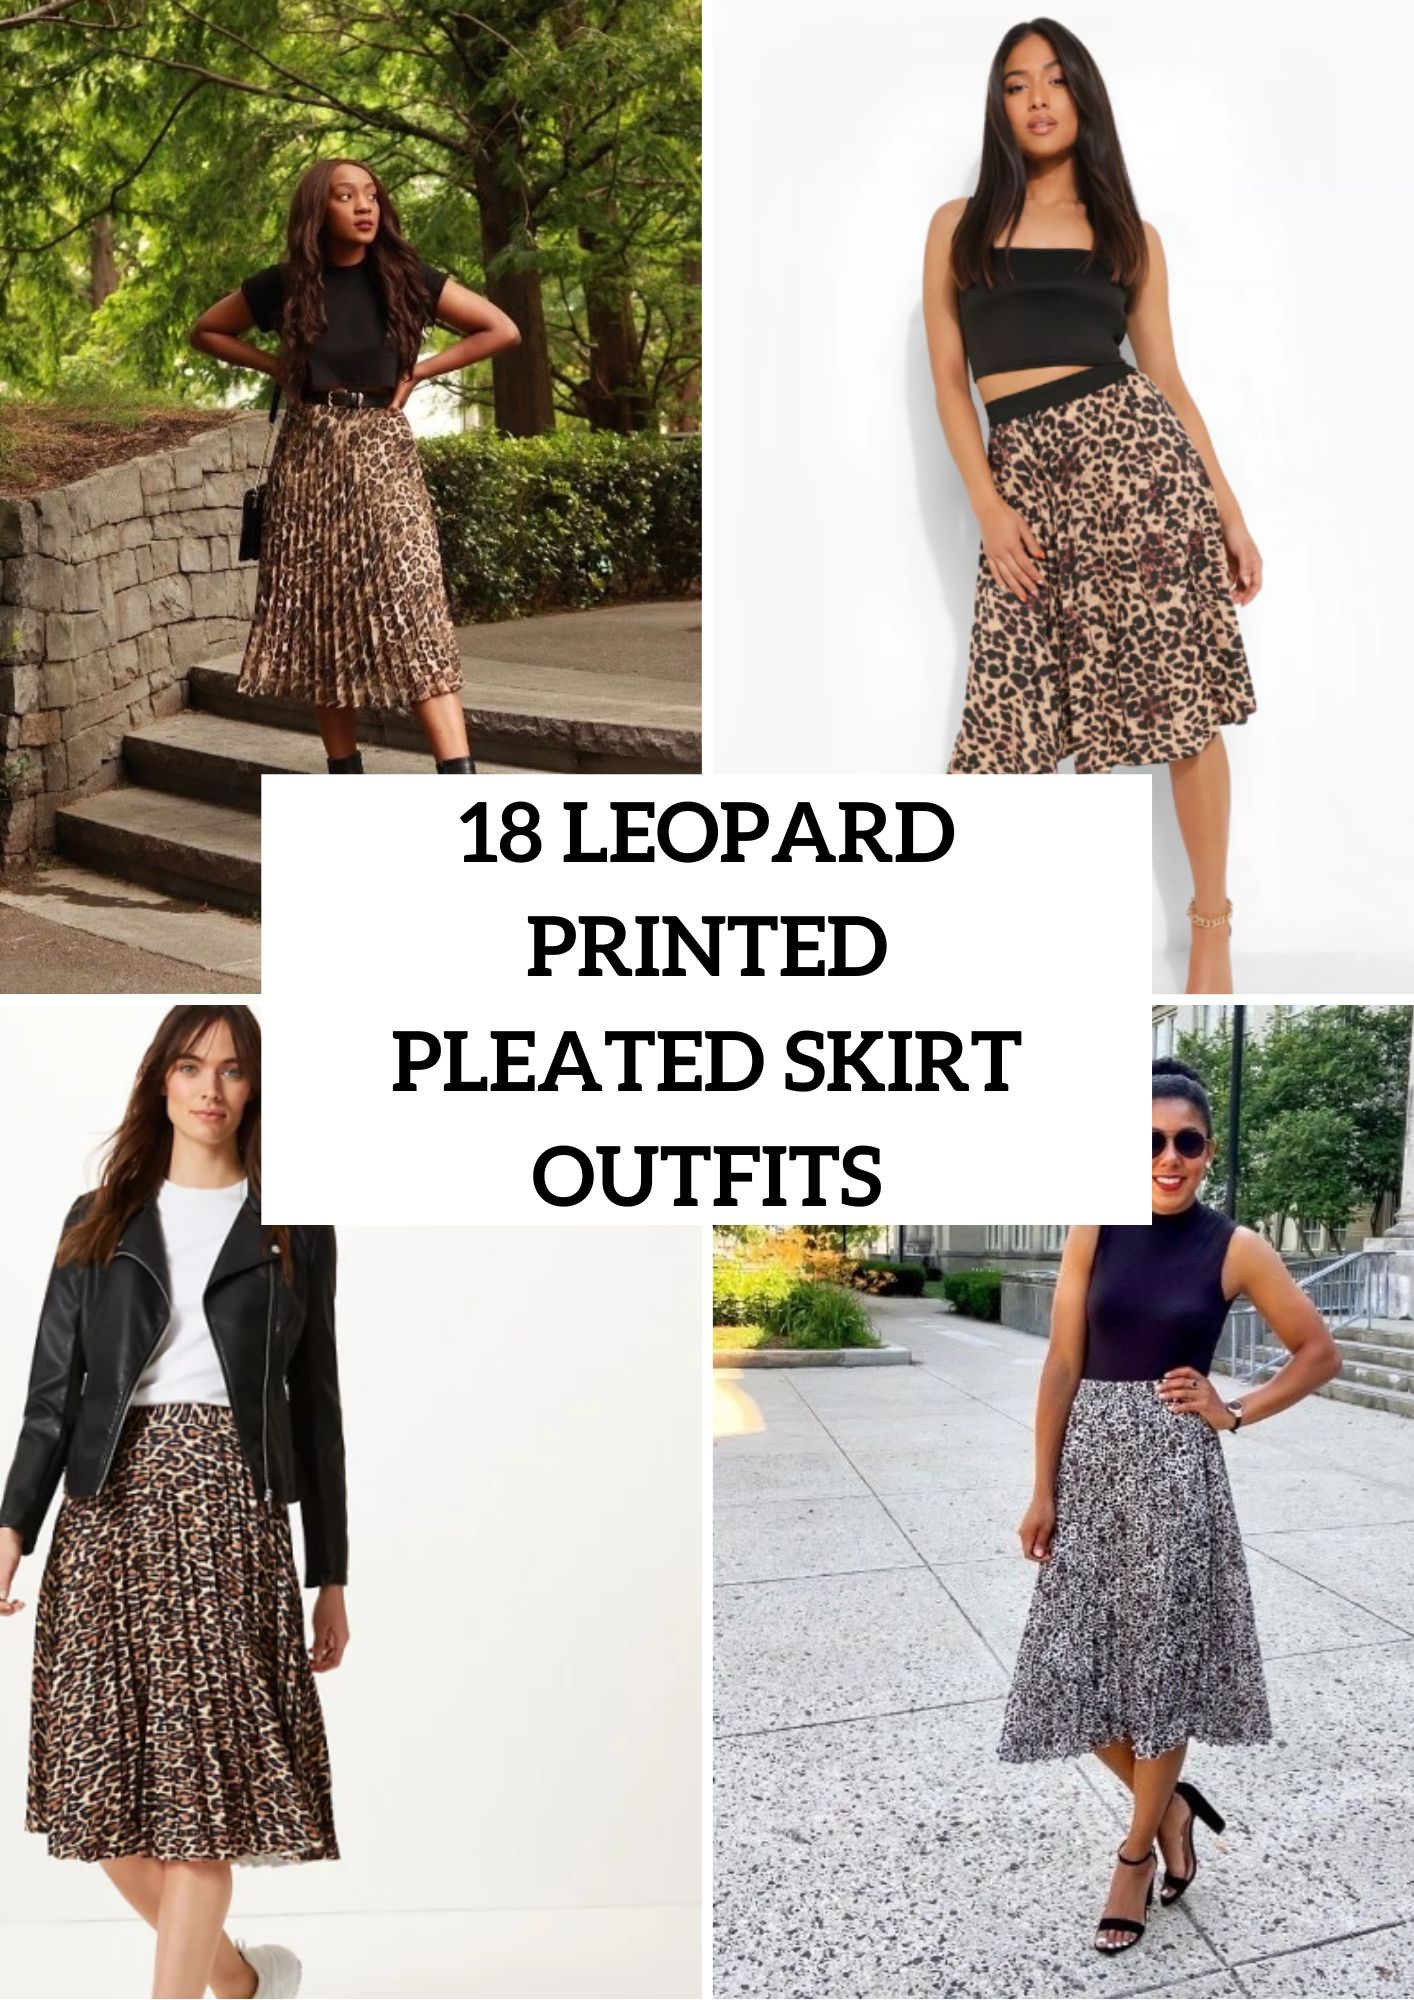 Outfits With Leopard Printed Pleated Skirts